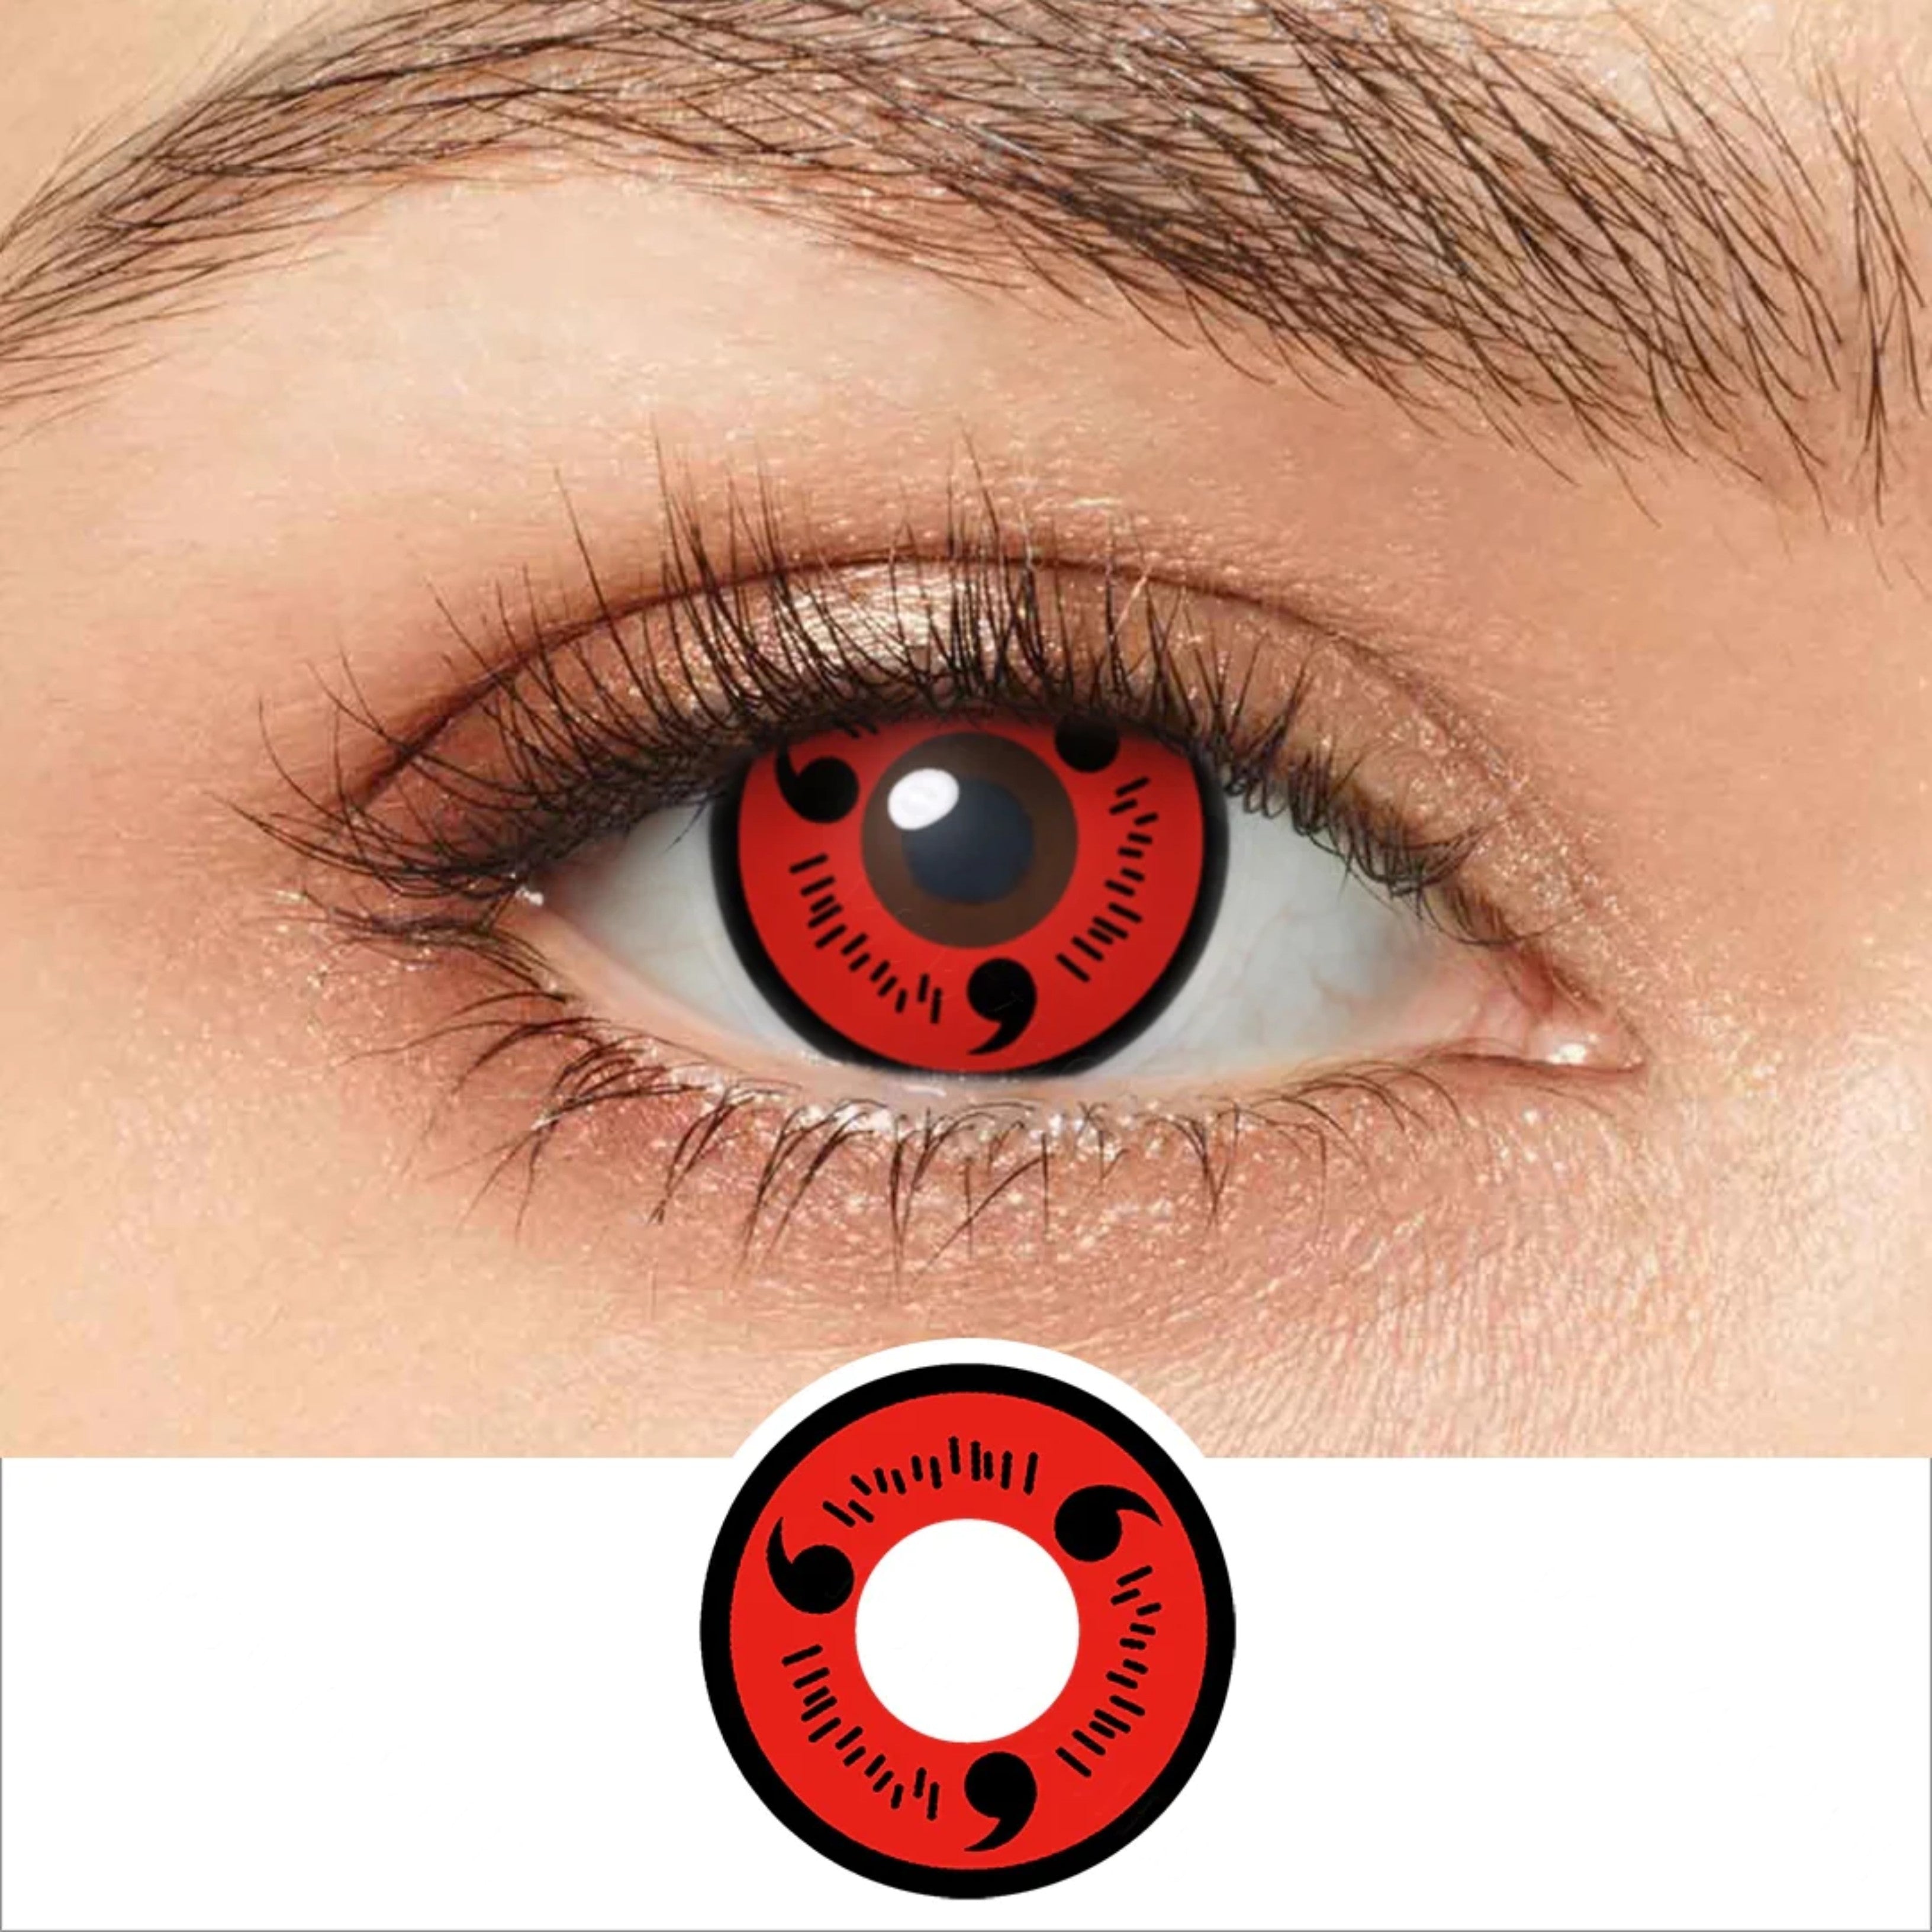 Anime Cosplay Coloured Contact Lenses - Girls Tears Starry Blue - $29.99 -  The Mad Shop